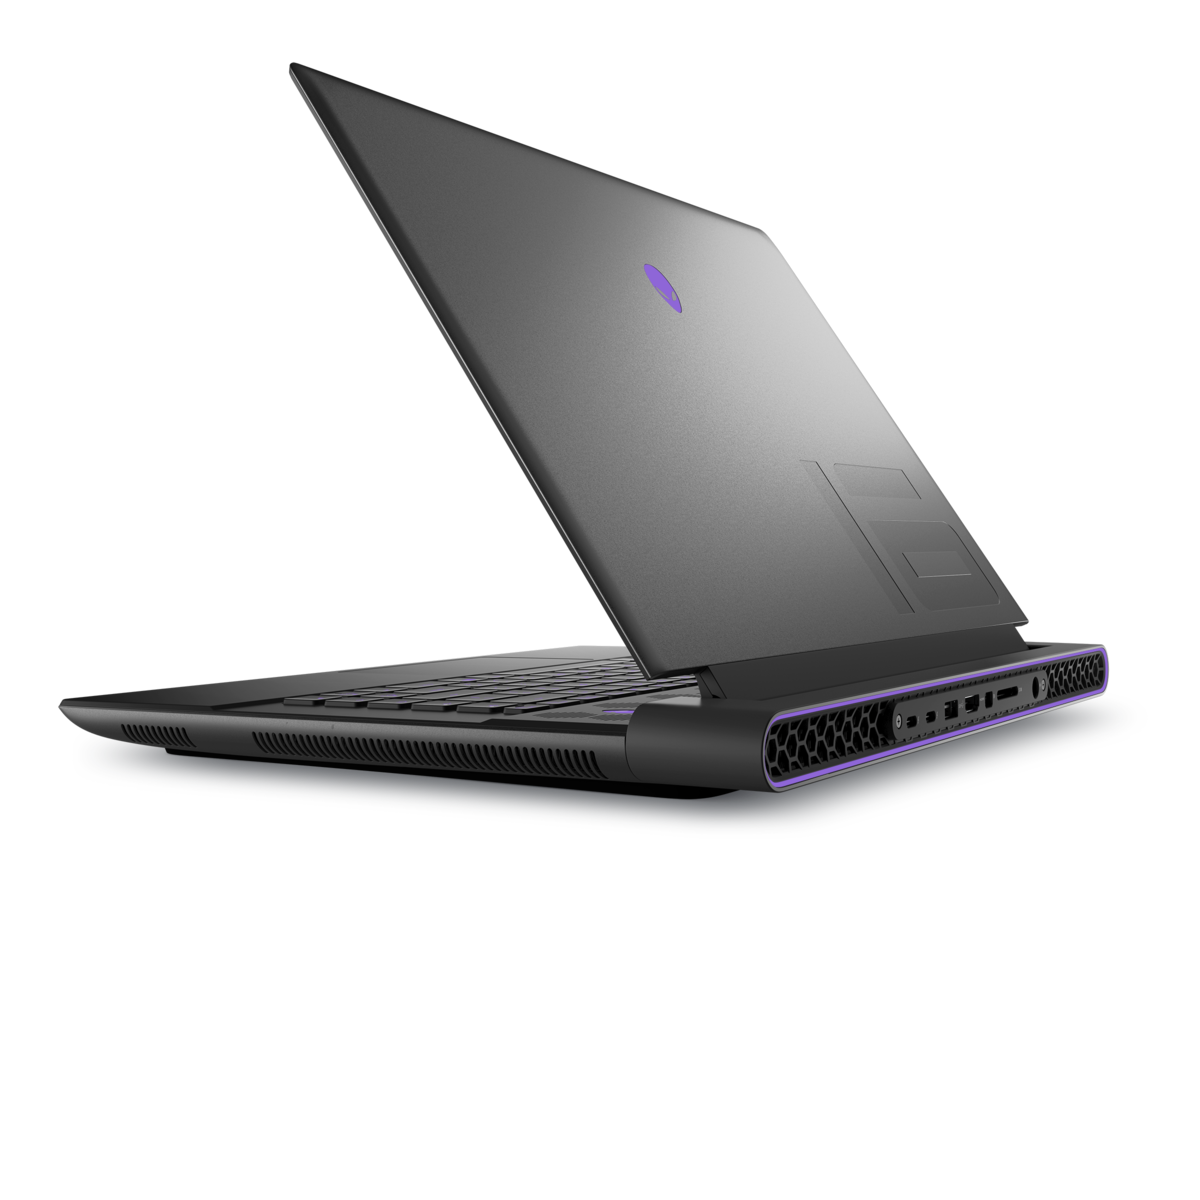 Alienware m16 officially revealed with up to a Core i9-13900HX